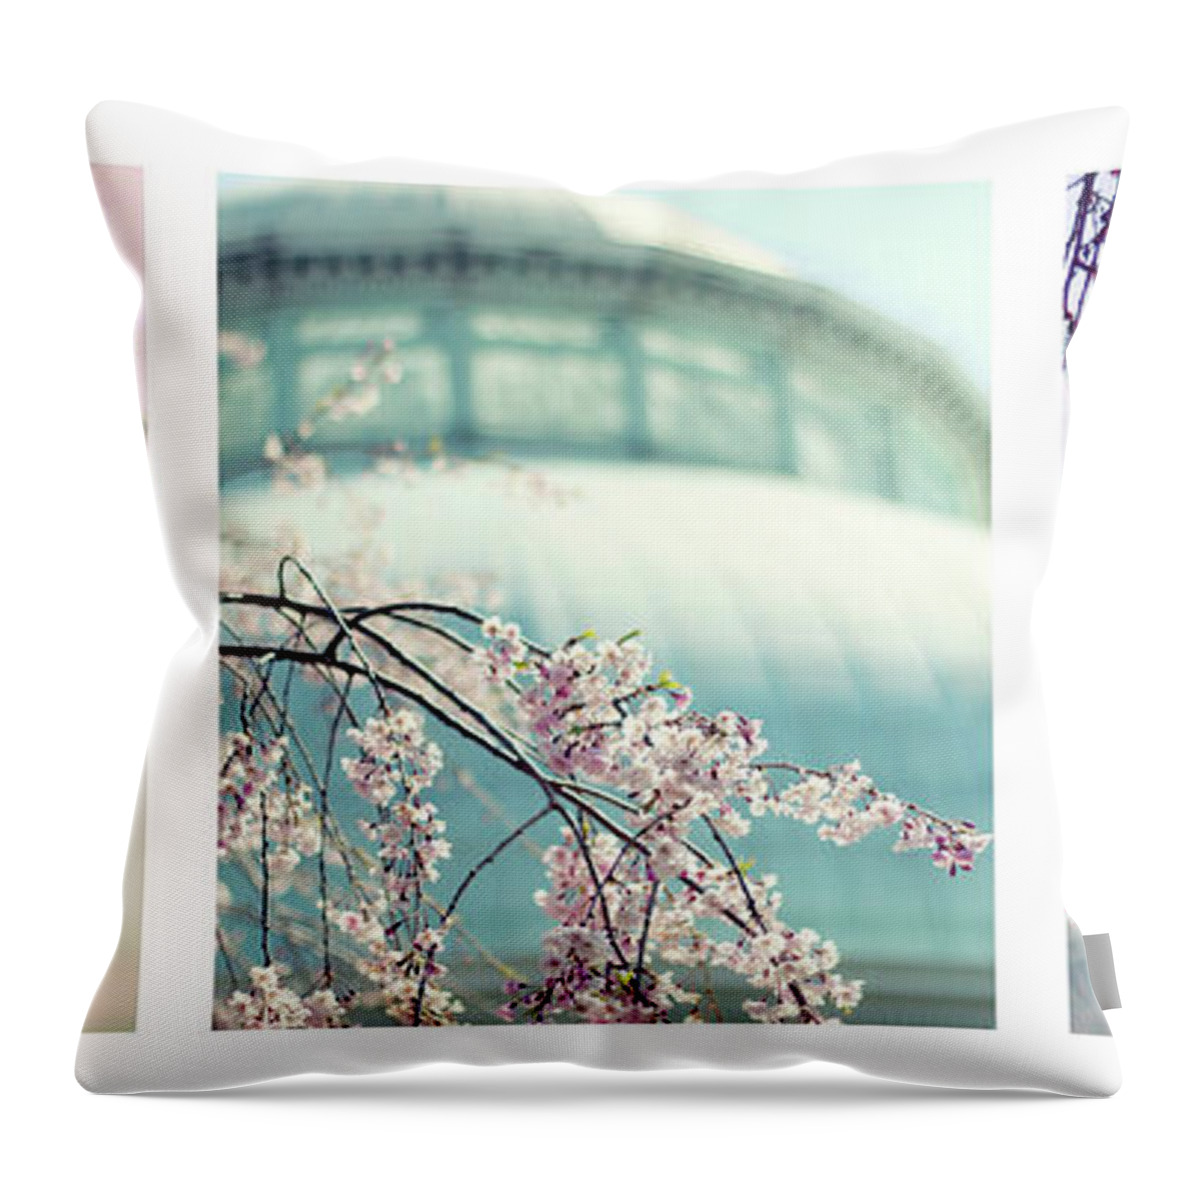 Triptych Throw Pillow featuring the photograph Greenhouse Blossoms Triptych by Jessica Jenney